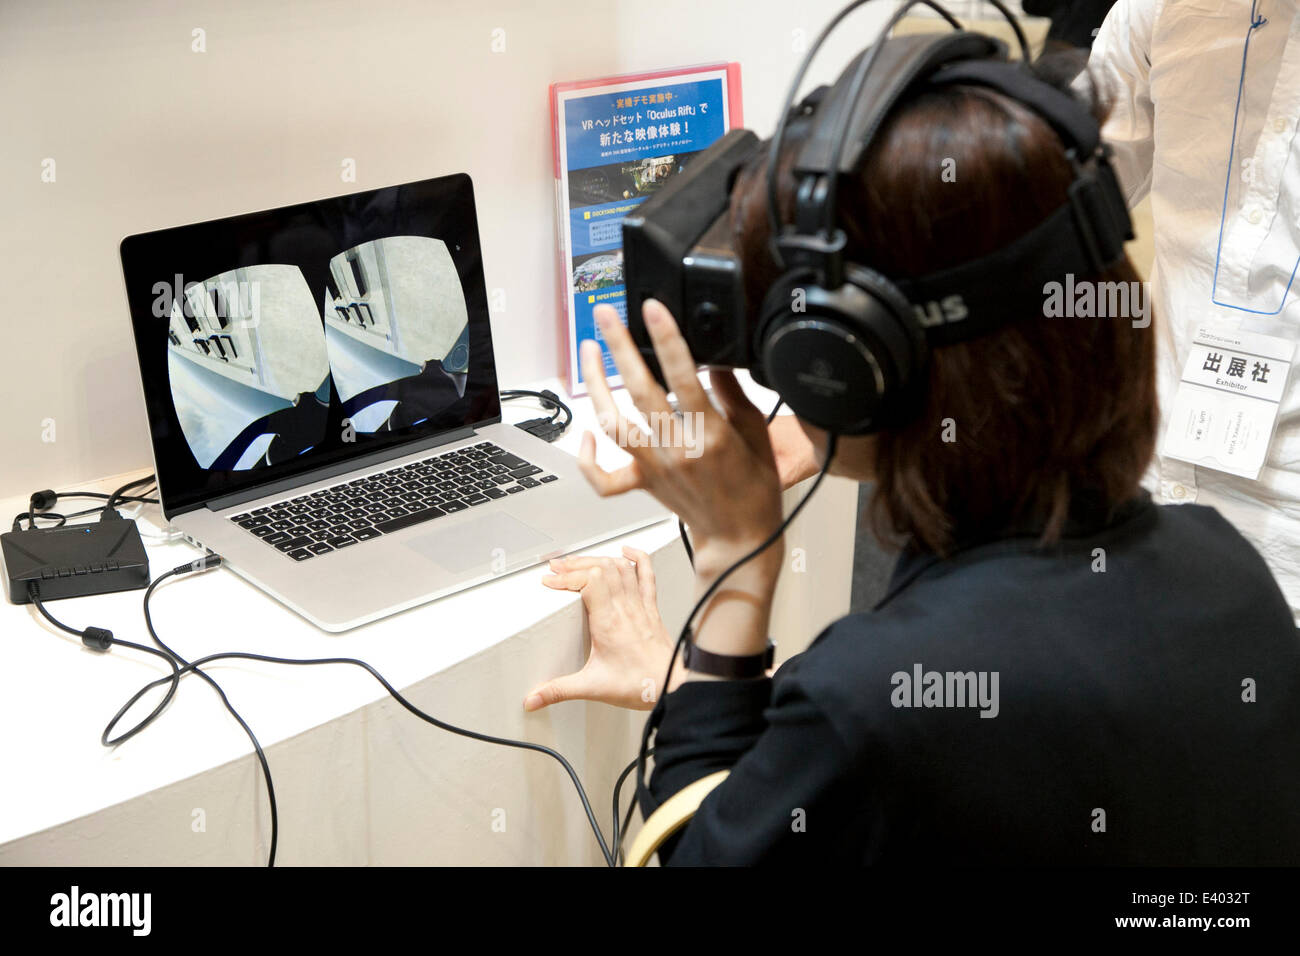 Tokyo, Japan. 2nd July, 2014. A woman tests the 'Oculus Rift' simulator at the Tokyo International Book Fair in Tokyo Big Sight on July 2, 2014. The 21st edition of Tokyo International Book Fair (TIBF) is Japan's largest publishing event, brings together publishing companies from 25 countries and 65,000 visitors, shows the latest electronic book technologies and services. The TIBF is open from July 2 to July 5. Credit:  Rodrigo Reyes Marin/AFLO/Alamy Live News Stock Photo